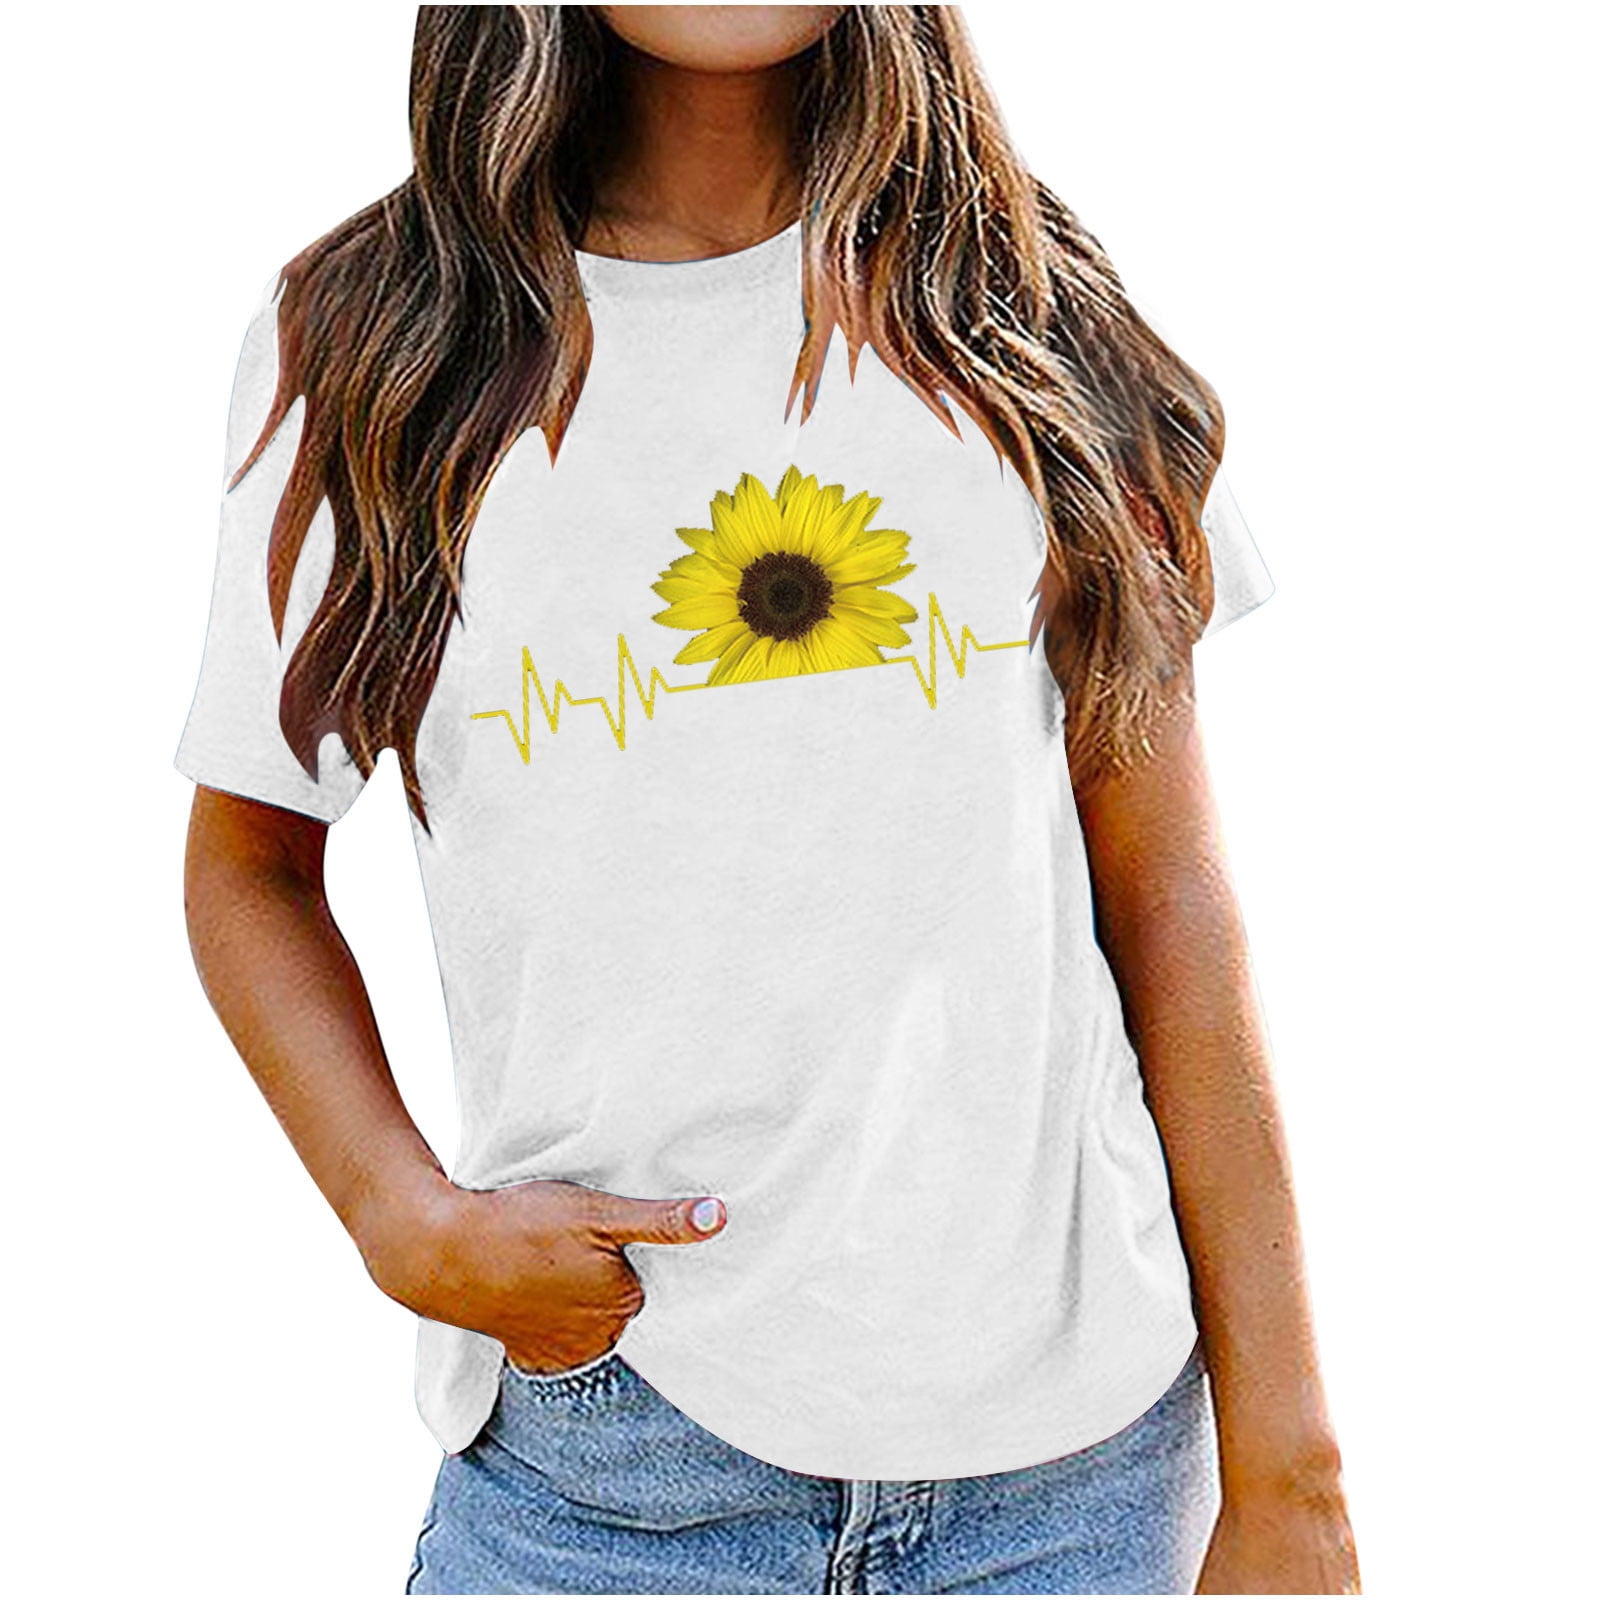 Cute Summer Tops for Women,Womens Tops and Blouses Floral Print Tees Short Sleeve Tunic Fashion Round Neck Tshirts 